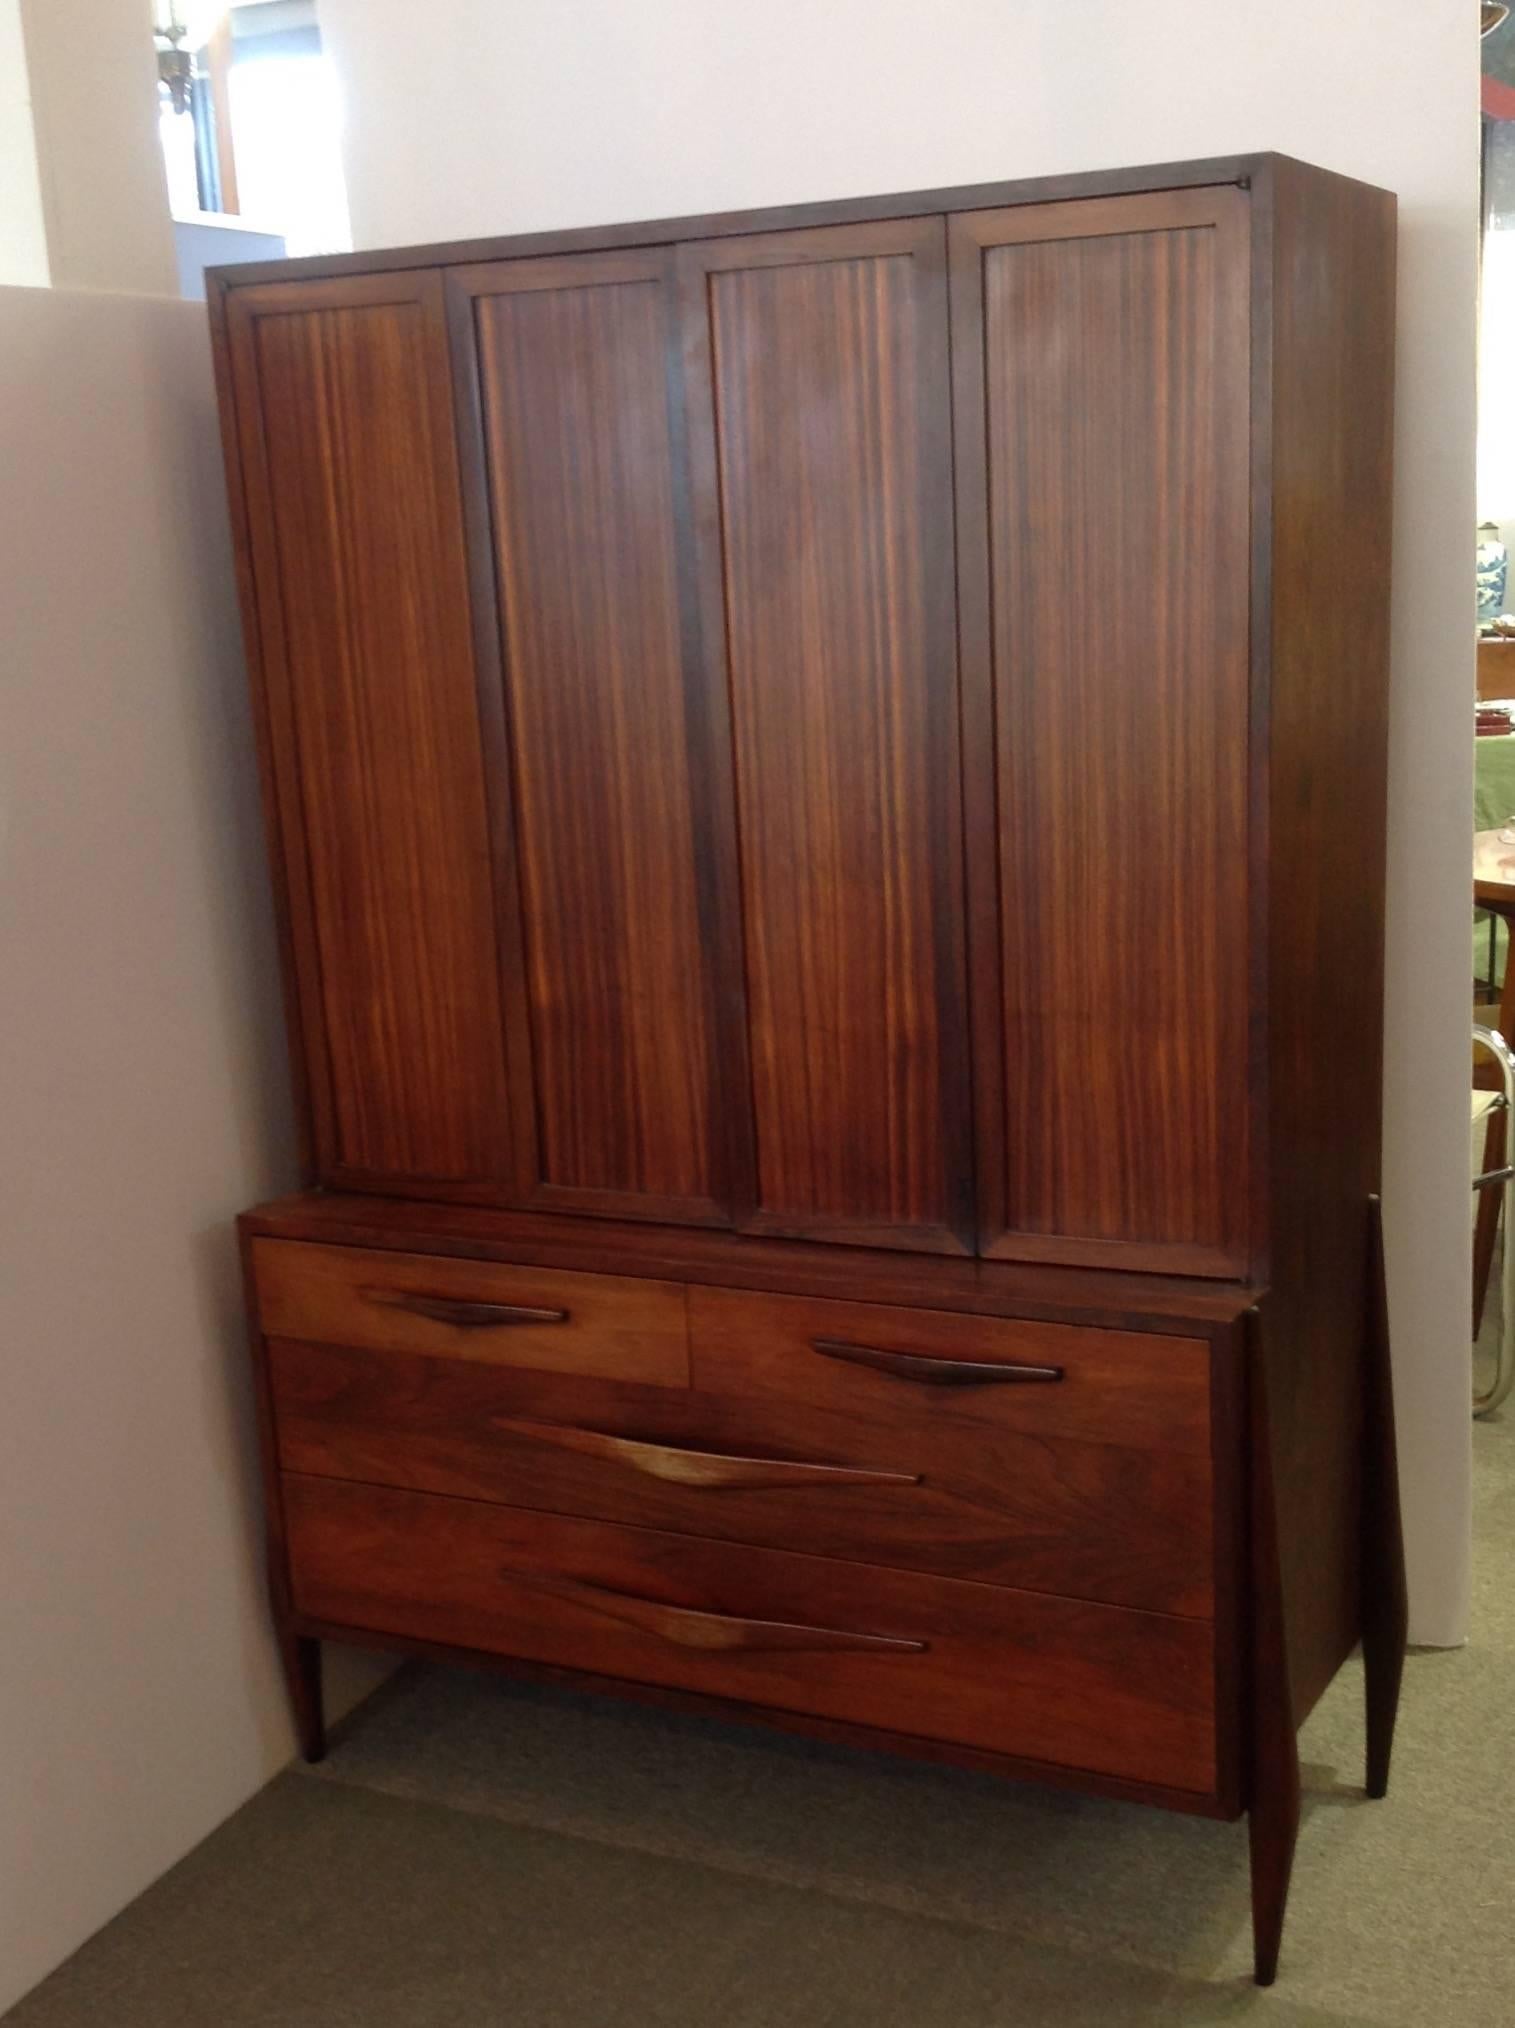 Rosewood Cabinet 1960's In Excellent Condition For Sale In Houston, TX